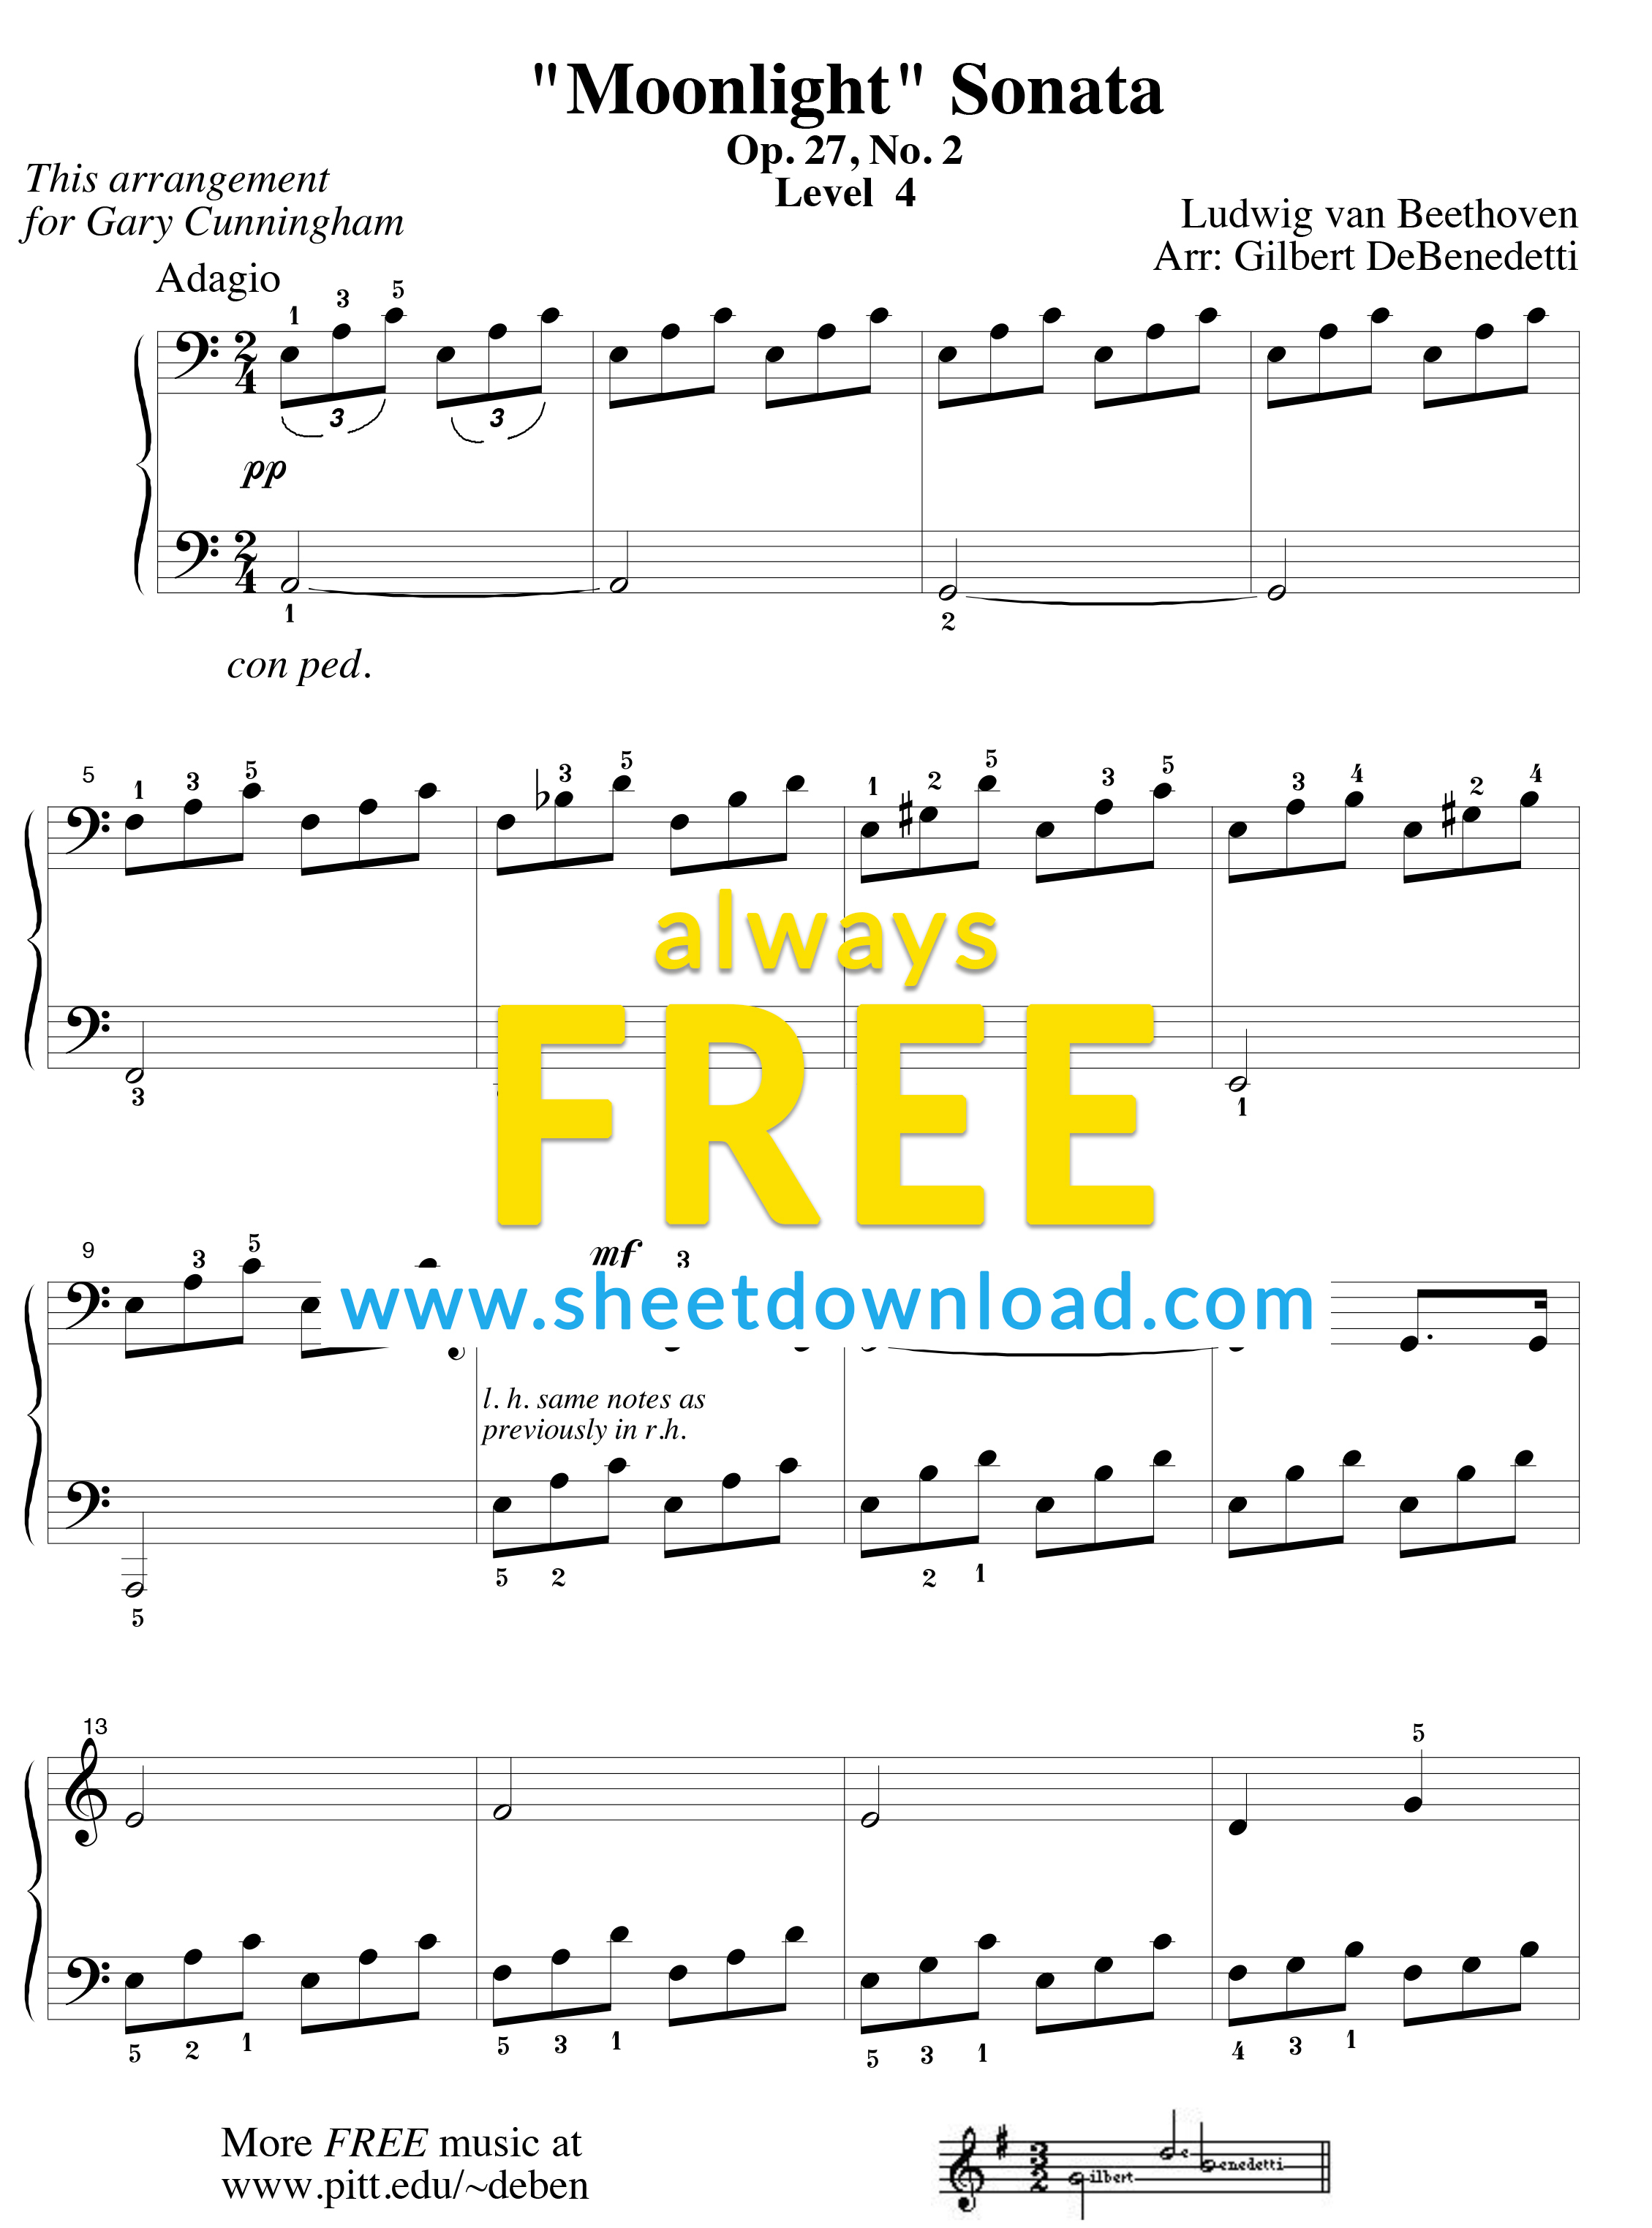 Top 100 Popular Piano Sheets Downloaded From Sheetdownload - Free Printable Sheet Music For Piano